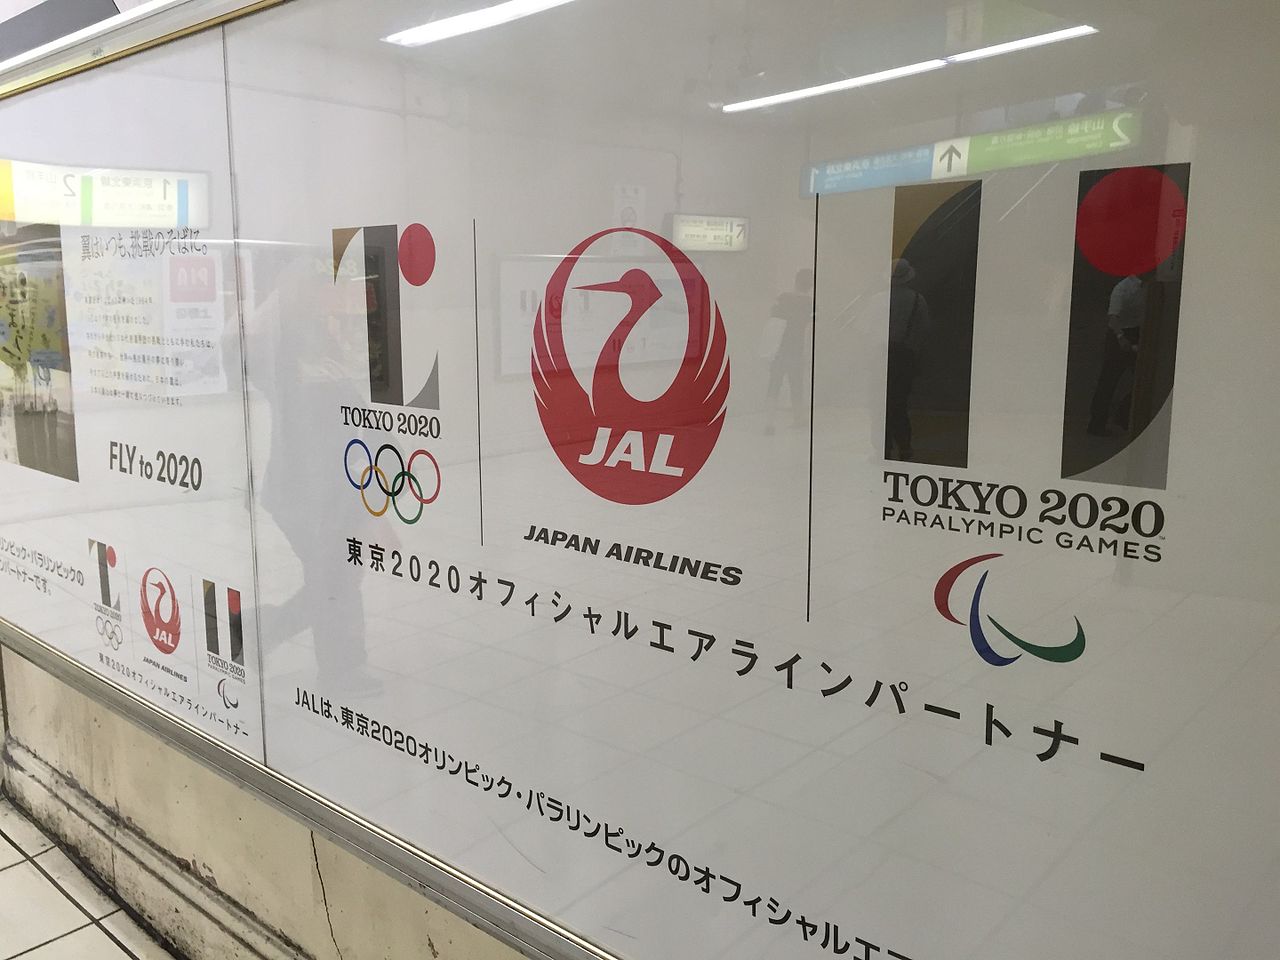 Tokyo Olympic 2020 Emblem with the logo of Japan Airlines (JAL)